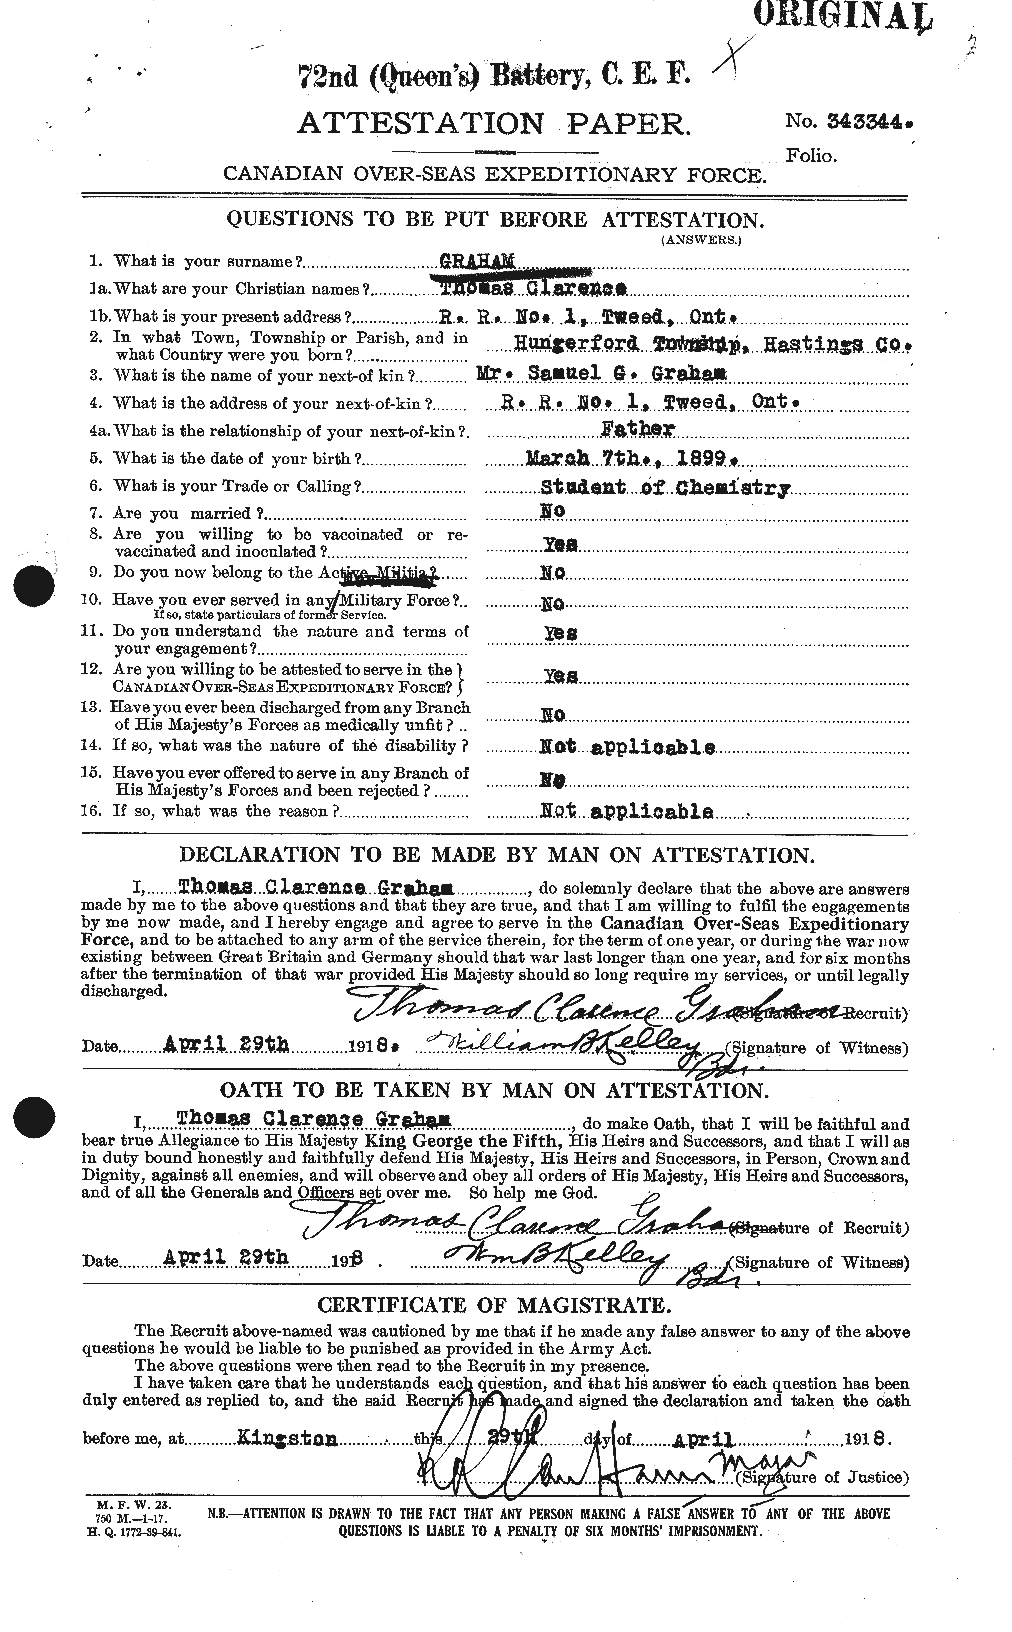 Personnel Records of the First World War - CEF 359512a